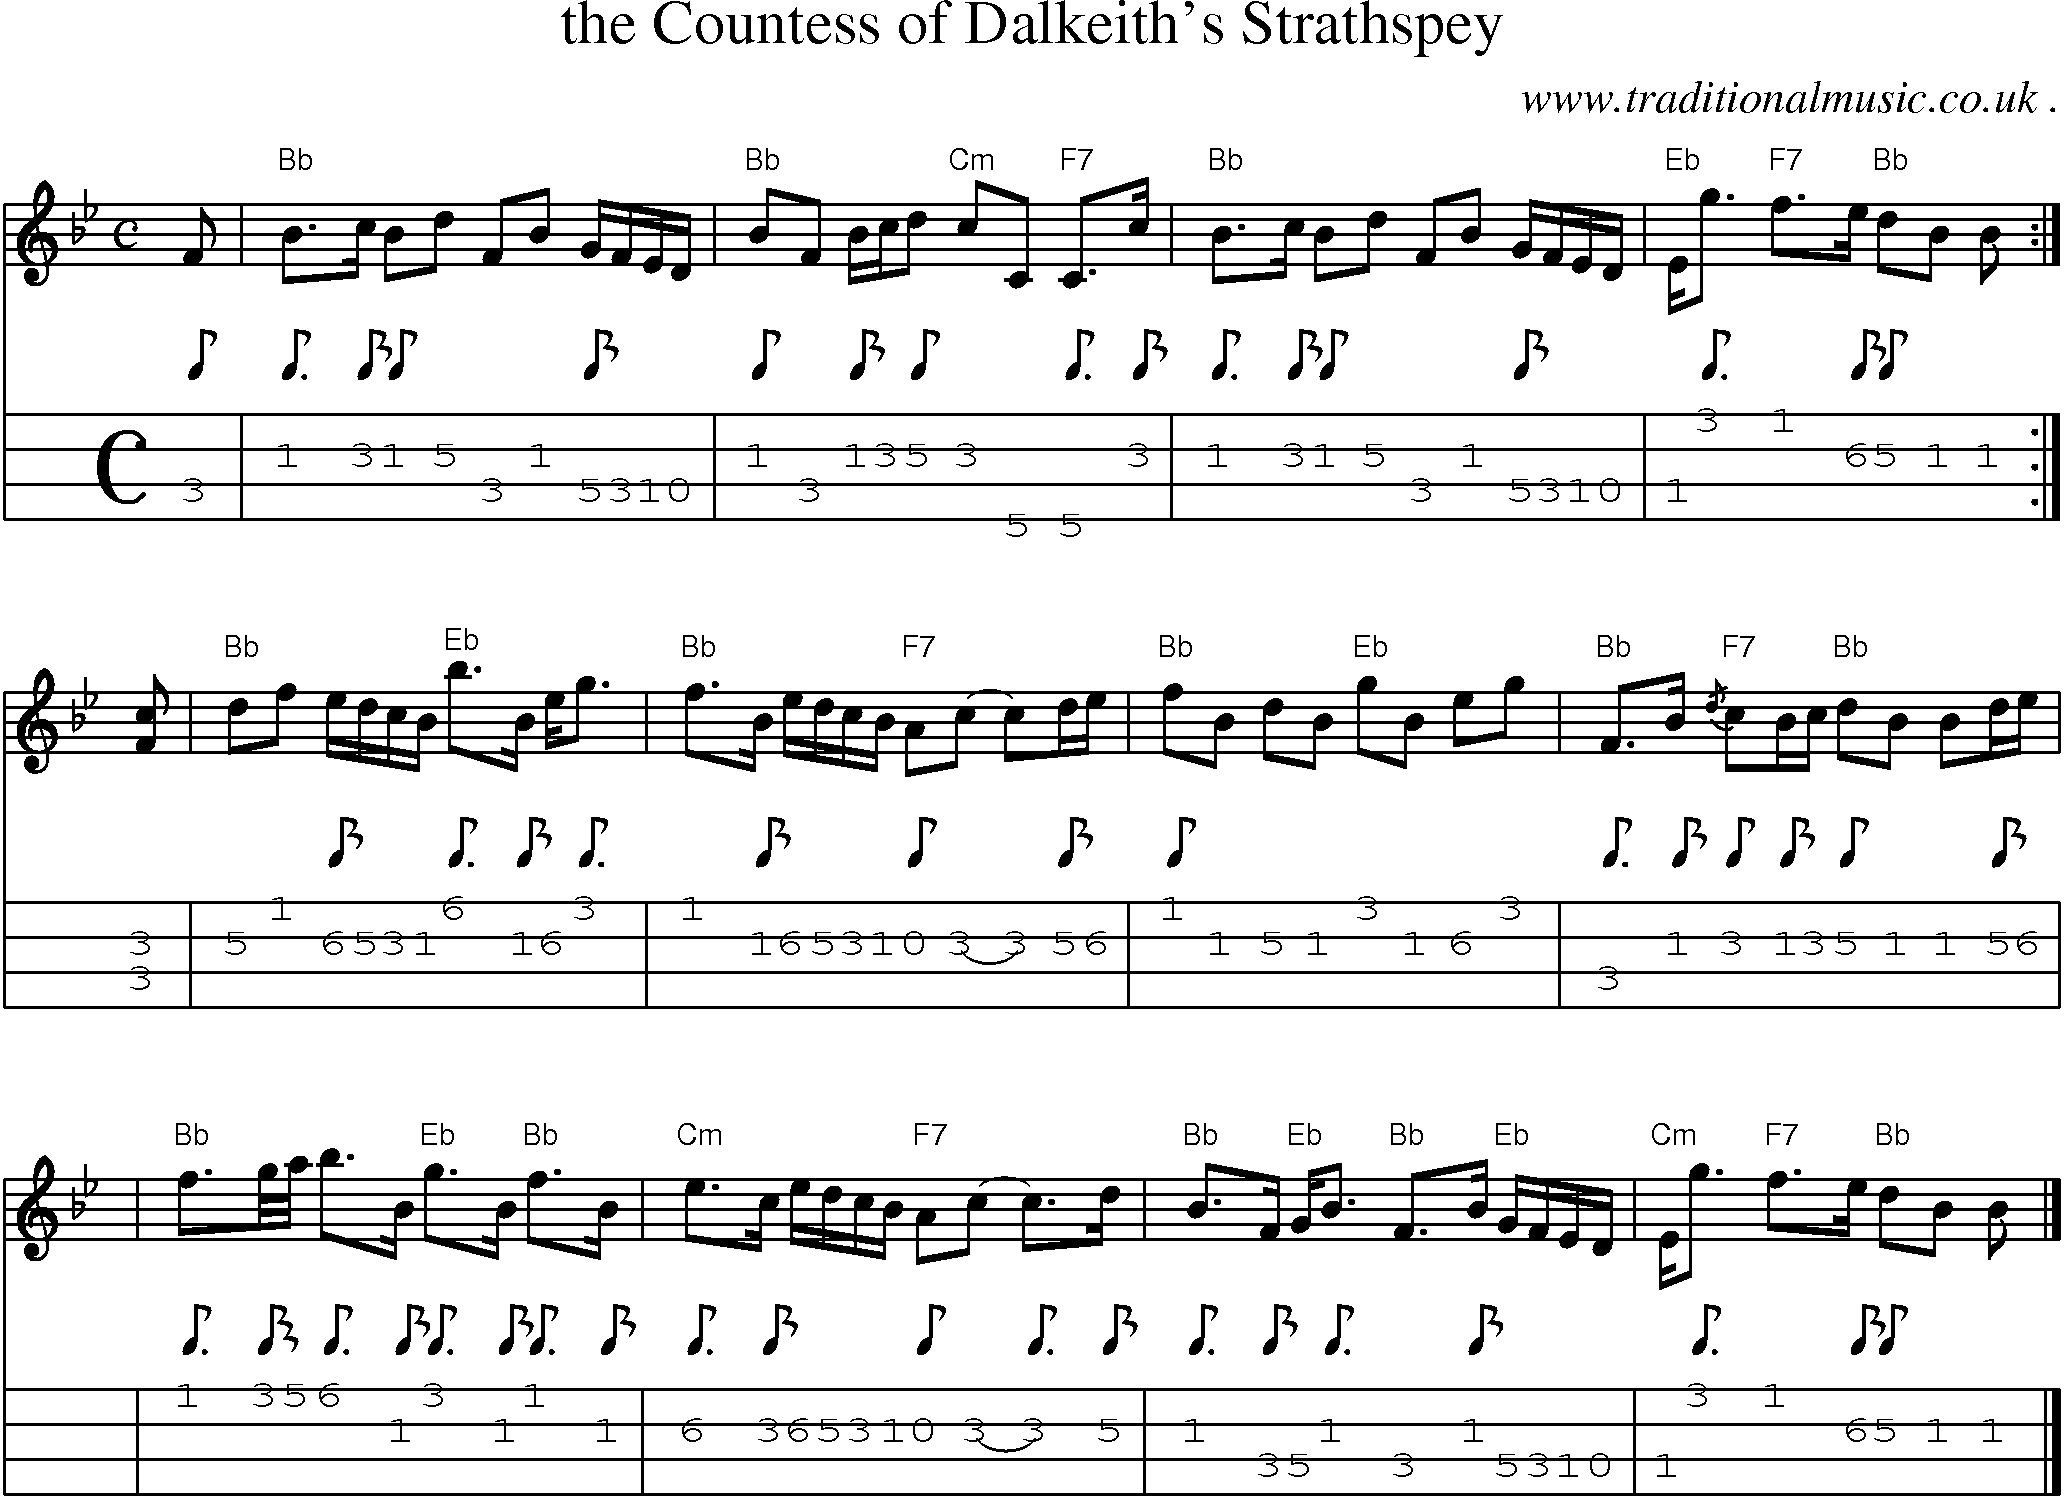 Sheet-music  score, Chords and Mandolin Tabs for The Countess Of Dalkeiths Strathspey